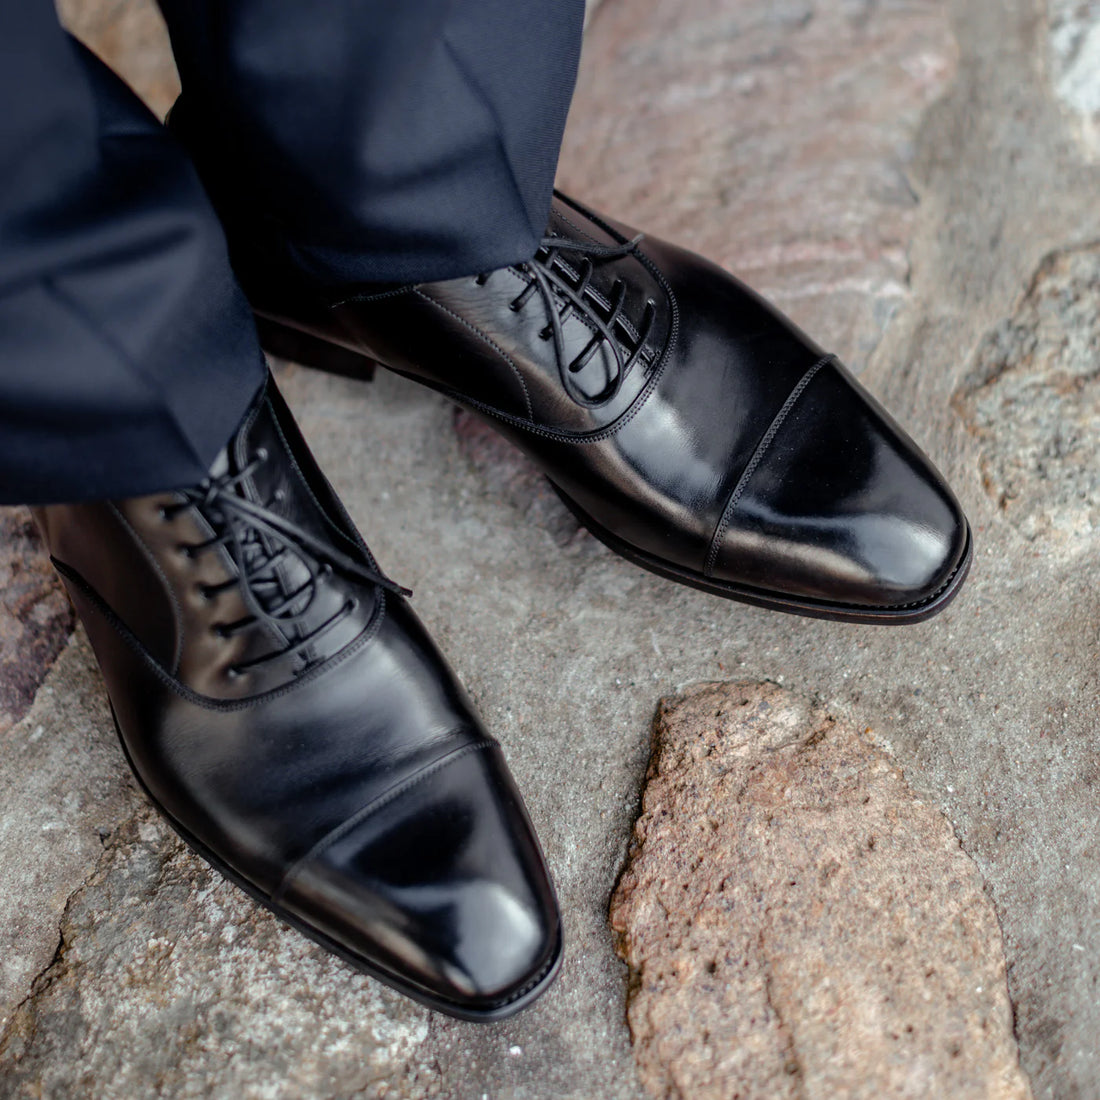 Close-up of a person's feet wearing polished black dress shoes, standing on a stone-paved surface.